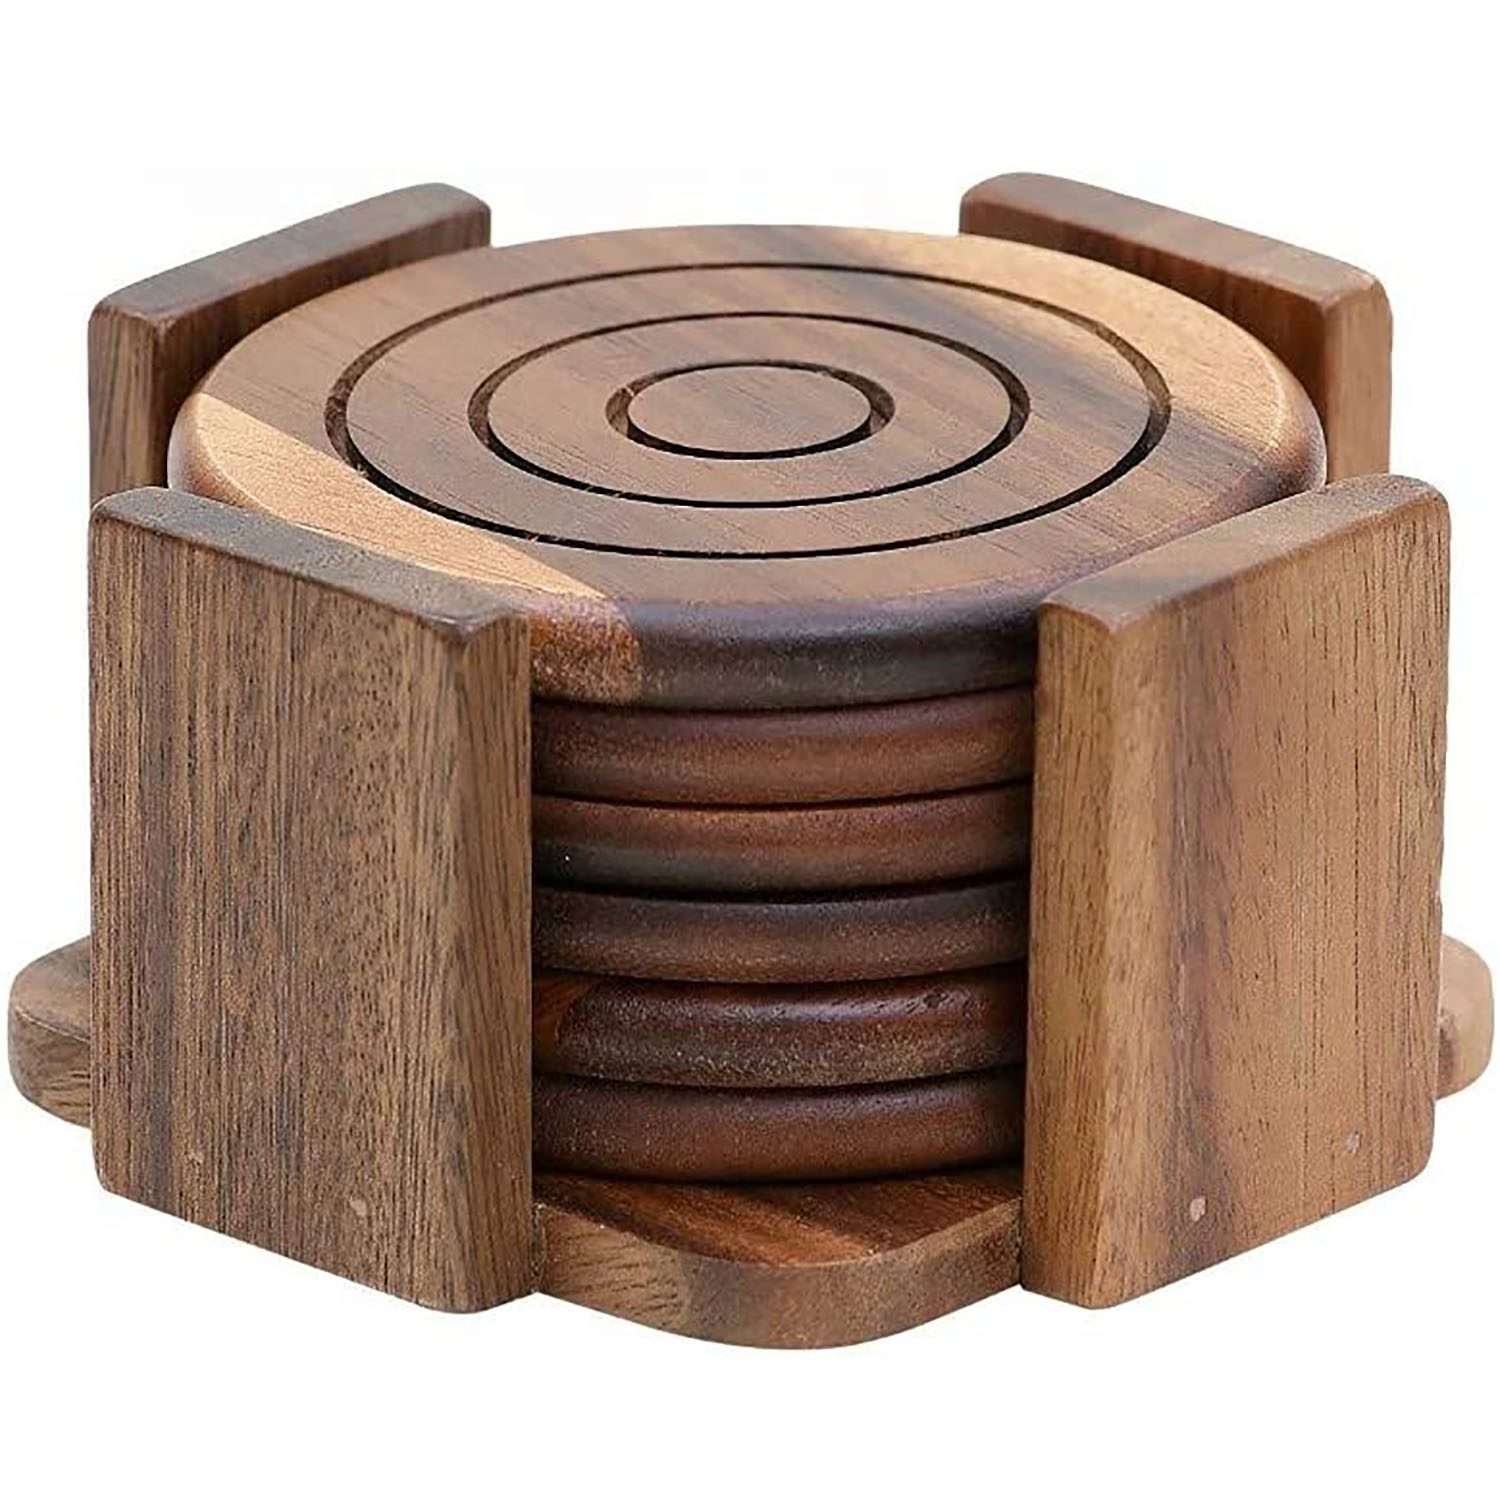 Handcrafted Wood Coasters | Unique Rustic Coaters Set of 6 | Coasters for drinks